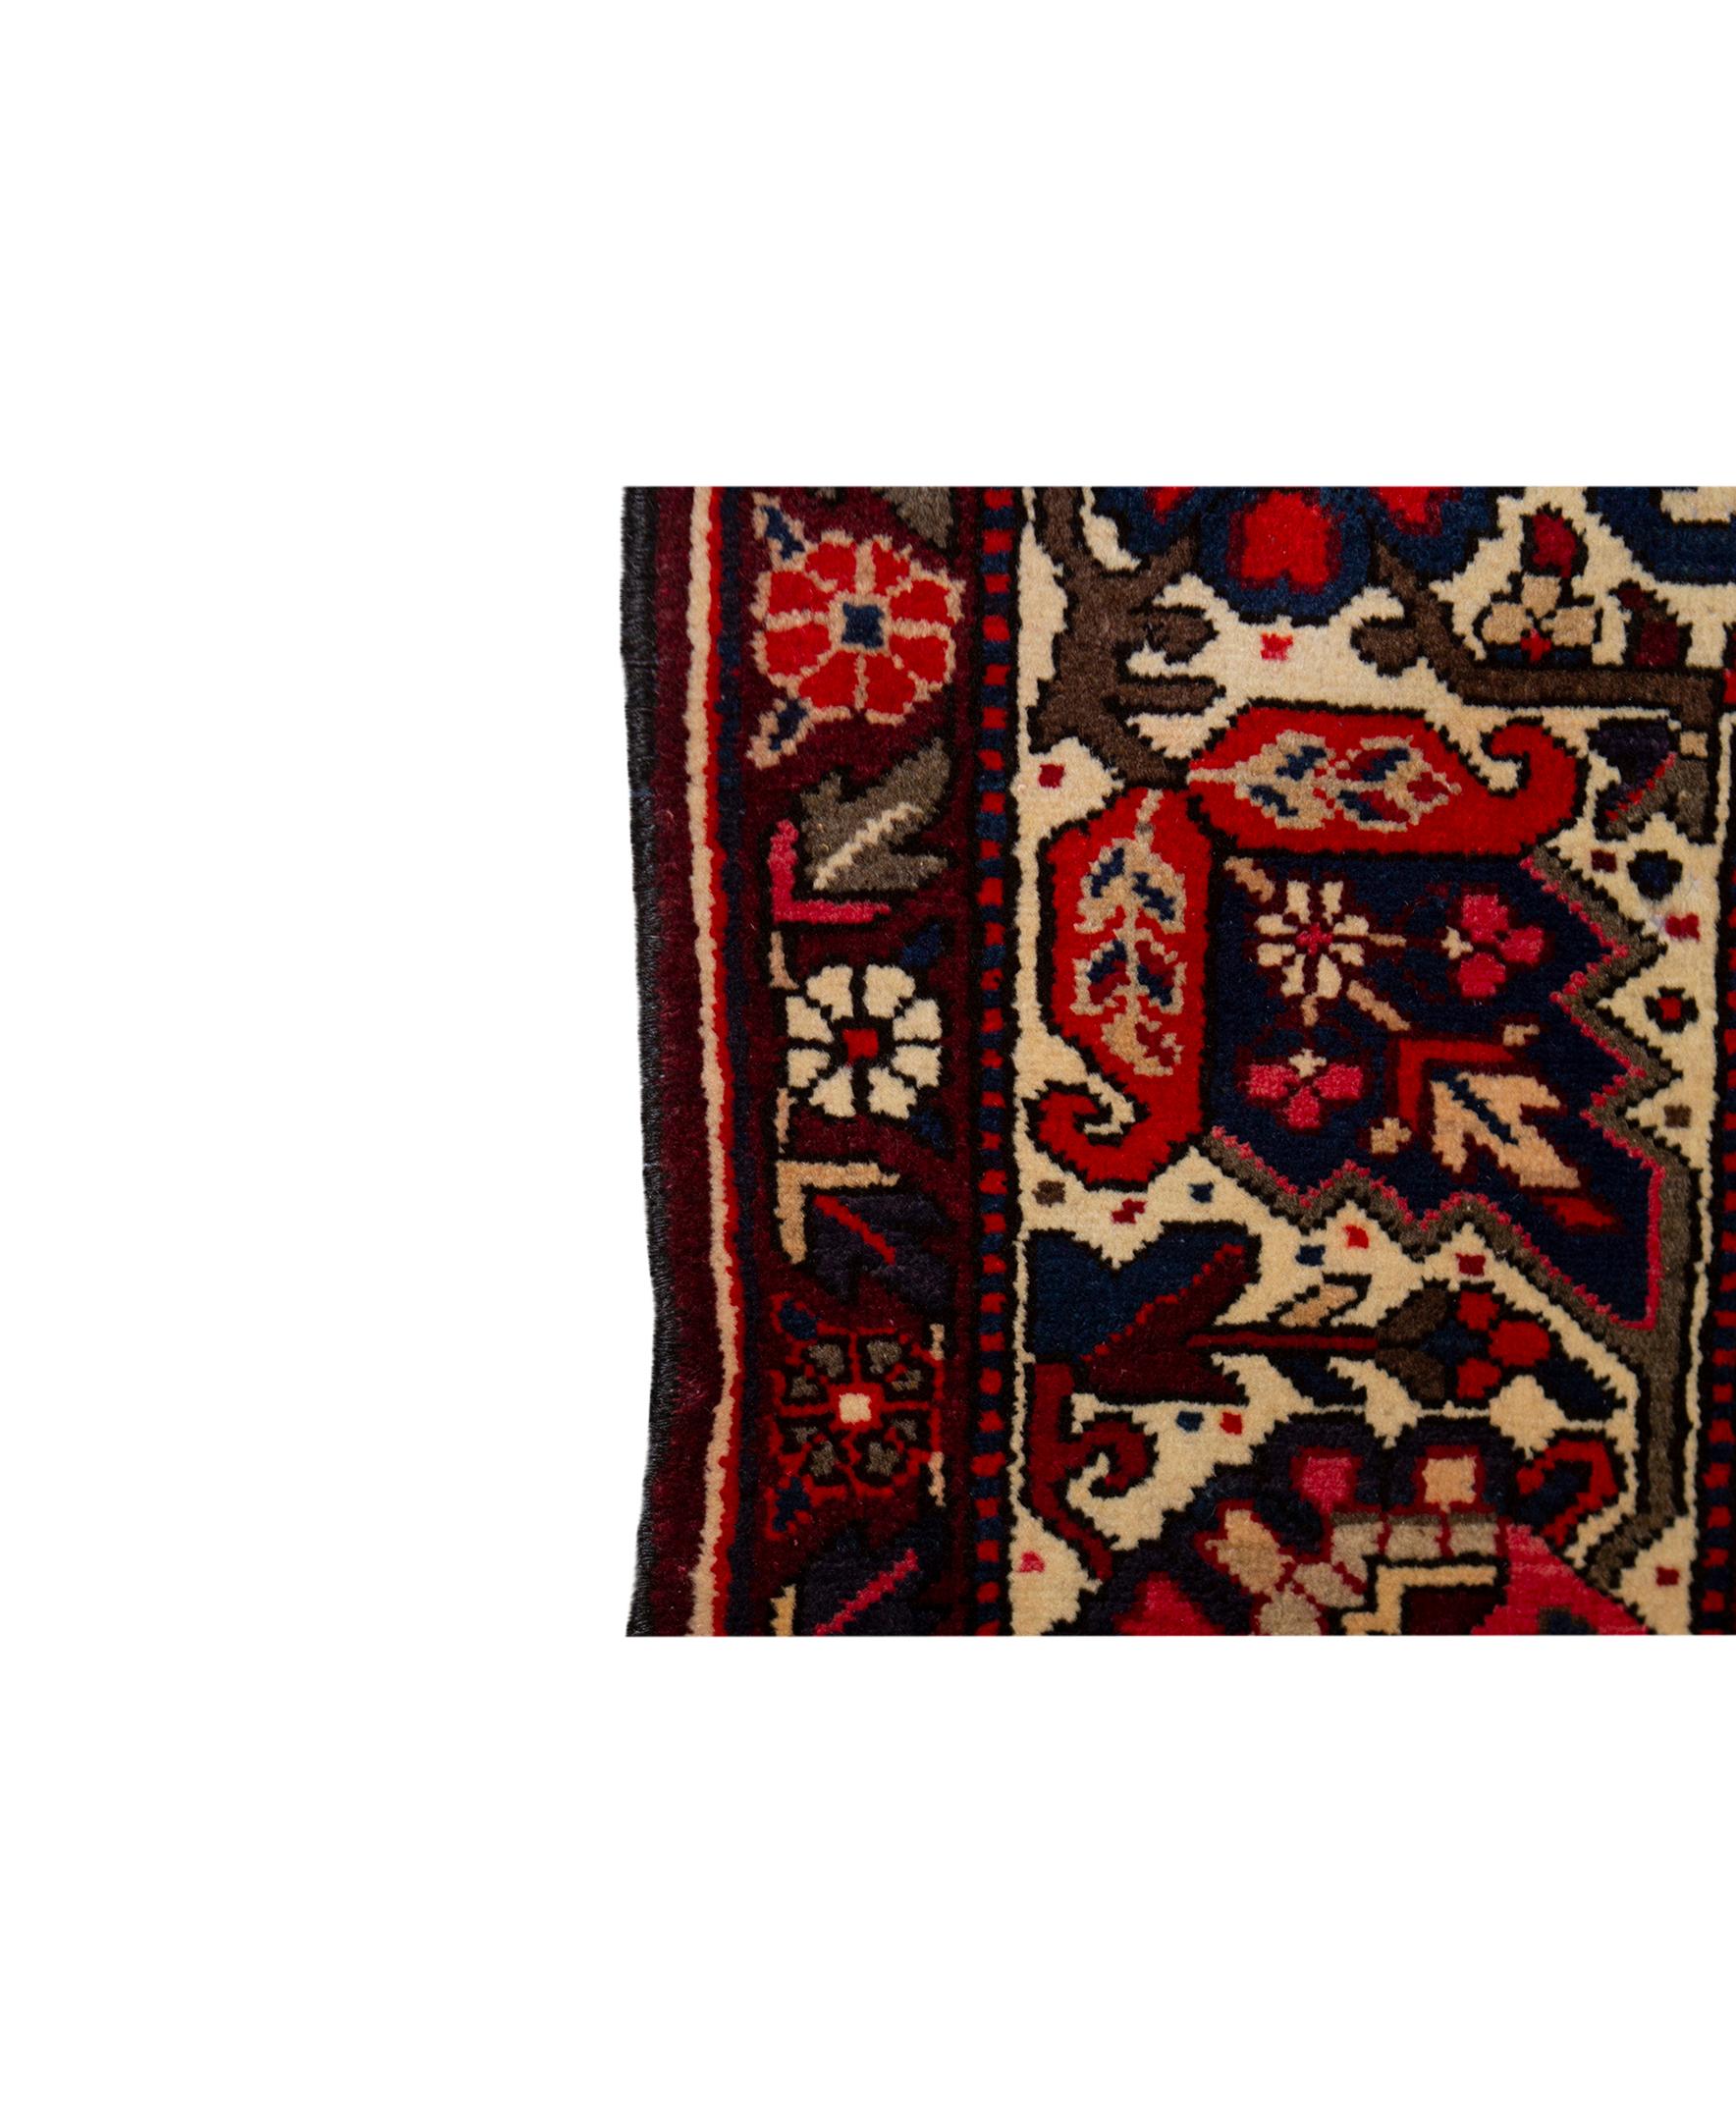   Antique Persian Fine Traditional Handwoven Luxury Wool Multi Rug. Sale: 10' X 13'
